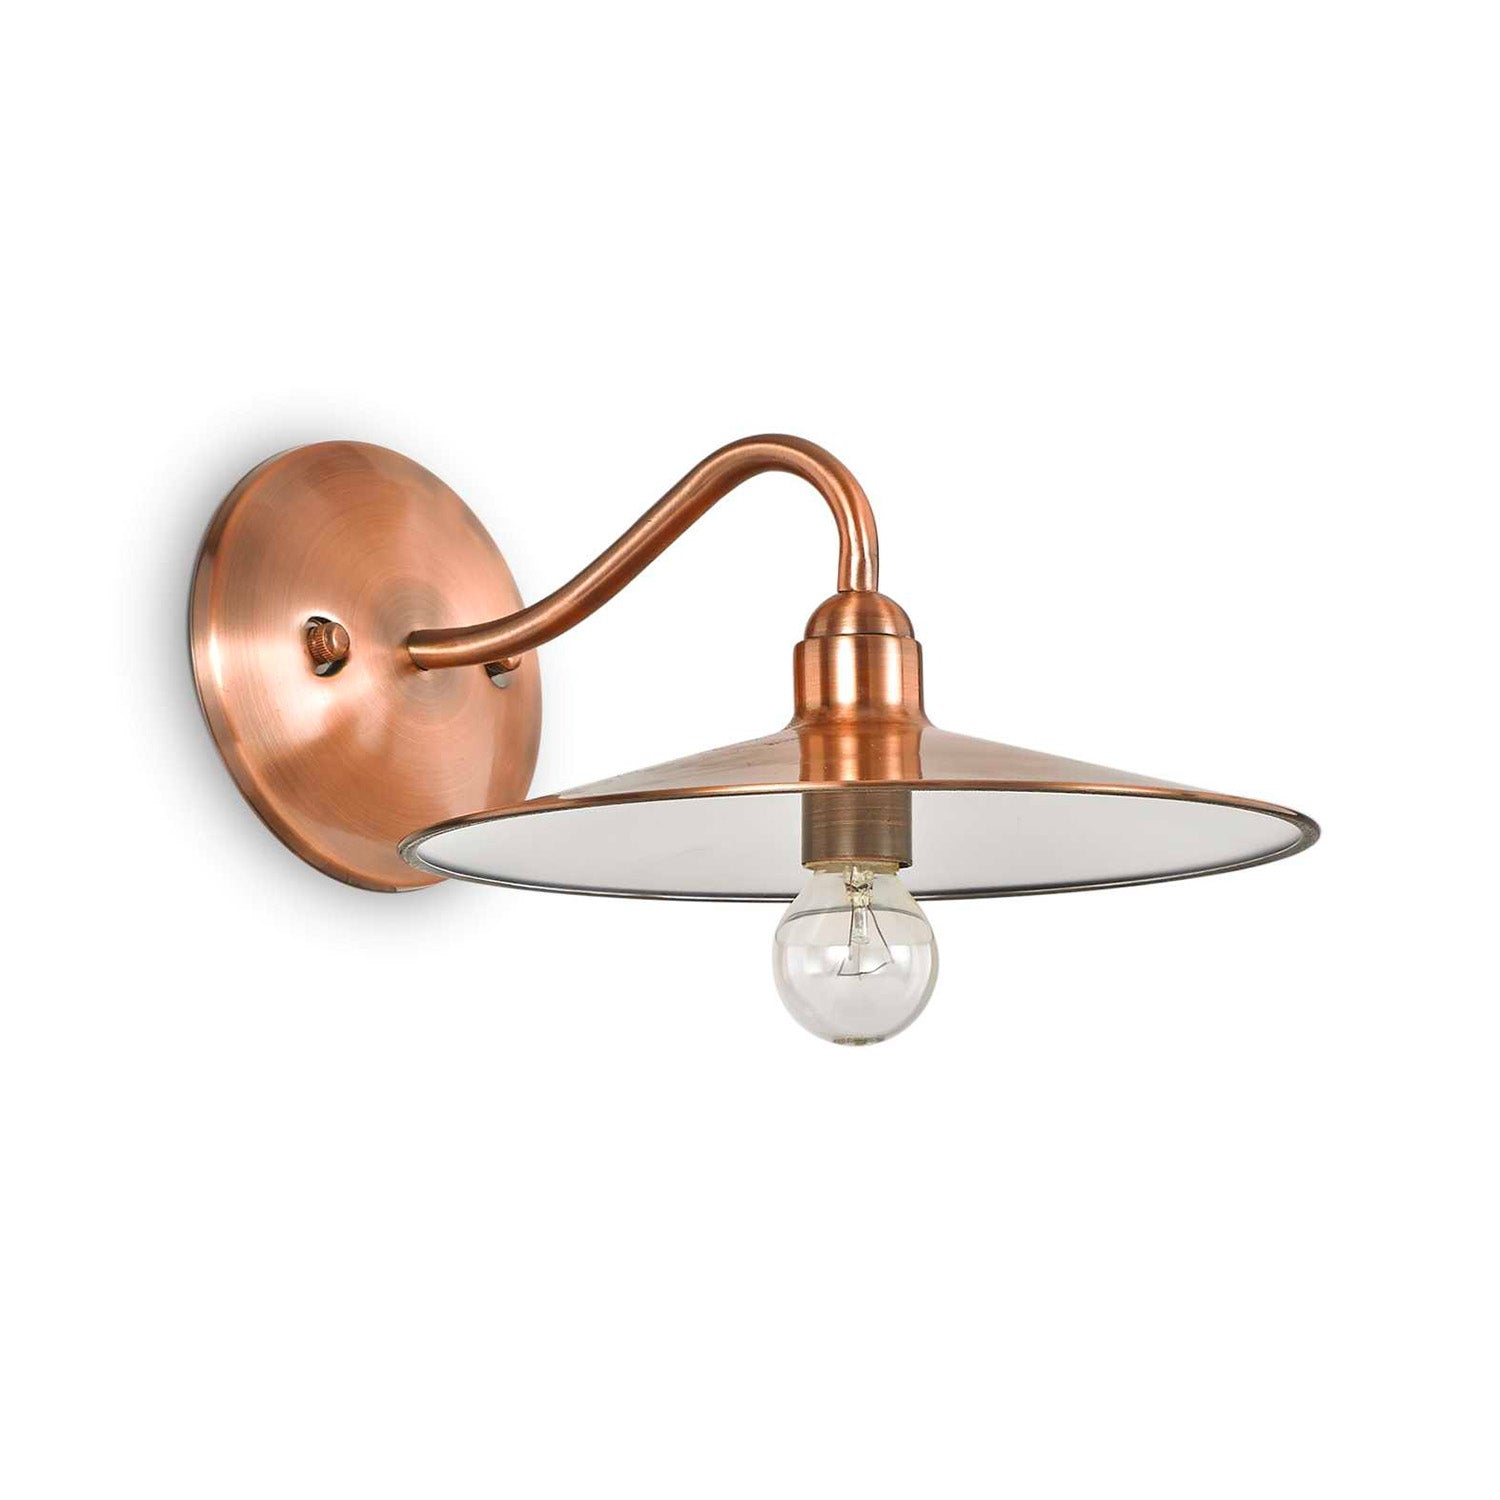 CANTINA - Vintage brass or copper wall light